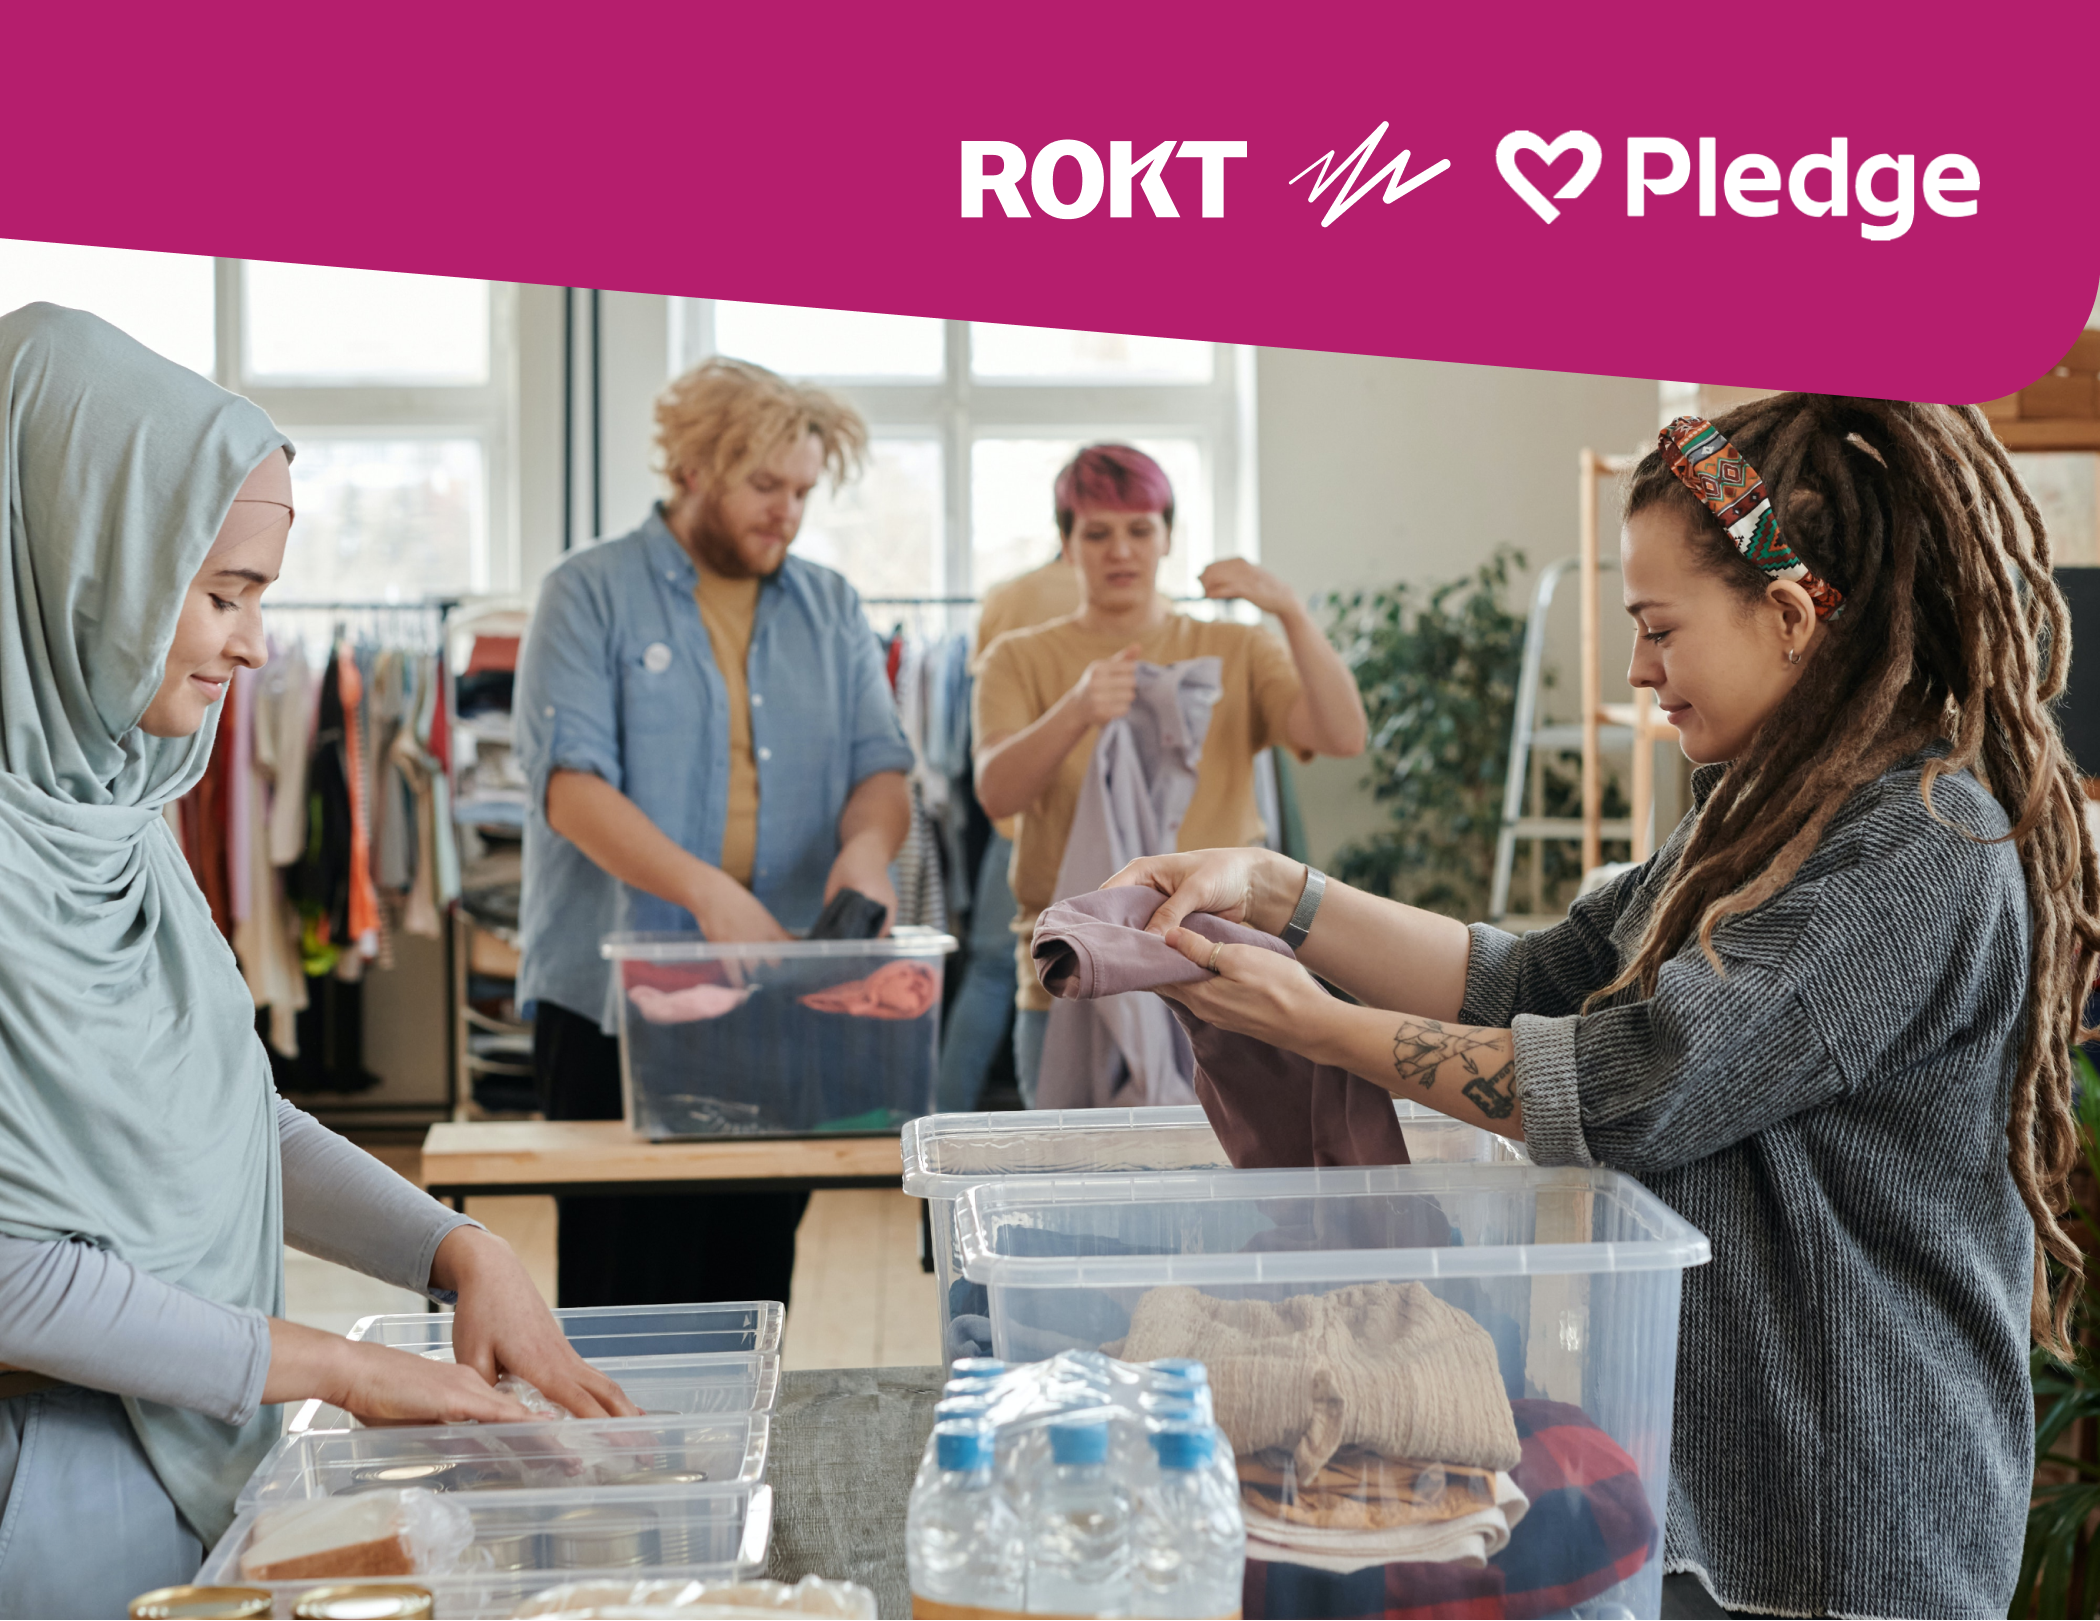 Pledge x Rokt: Give shoppers the gift of donations